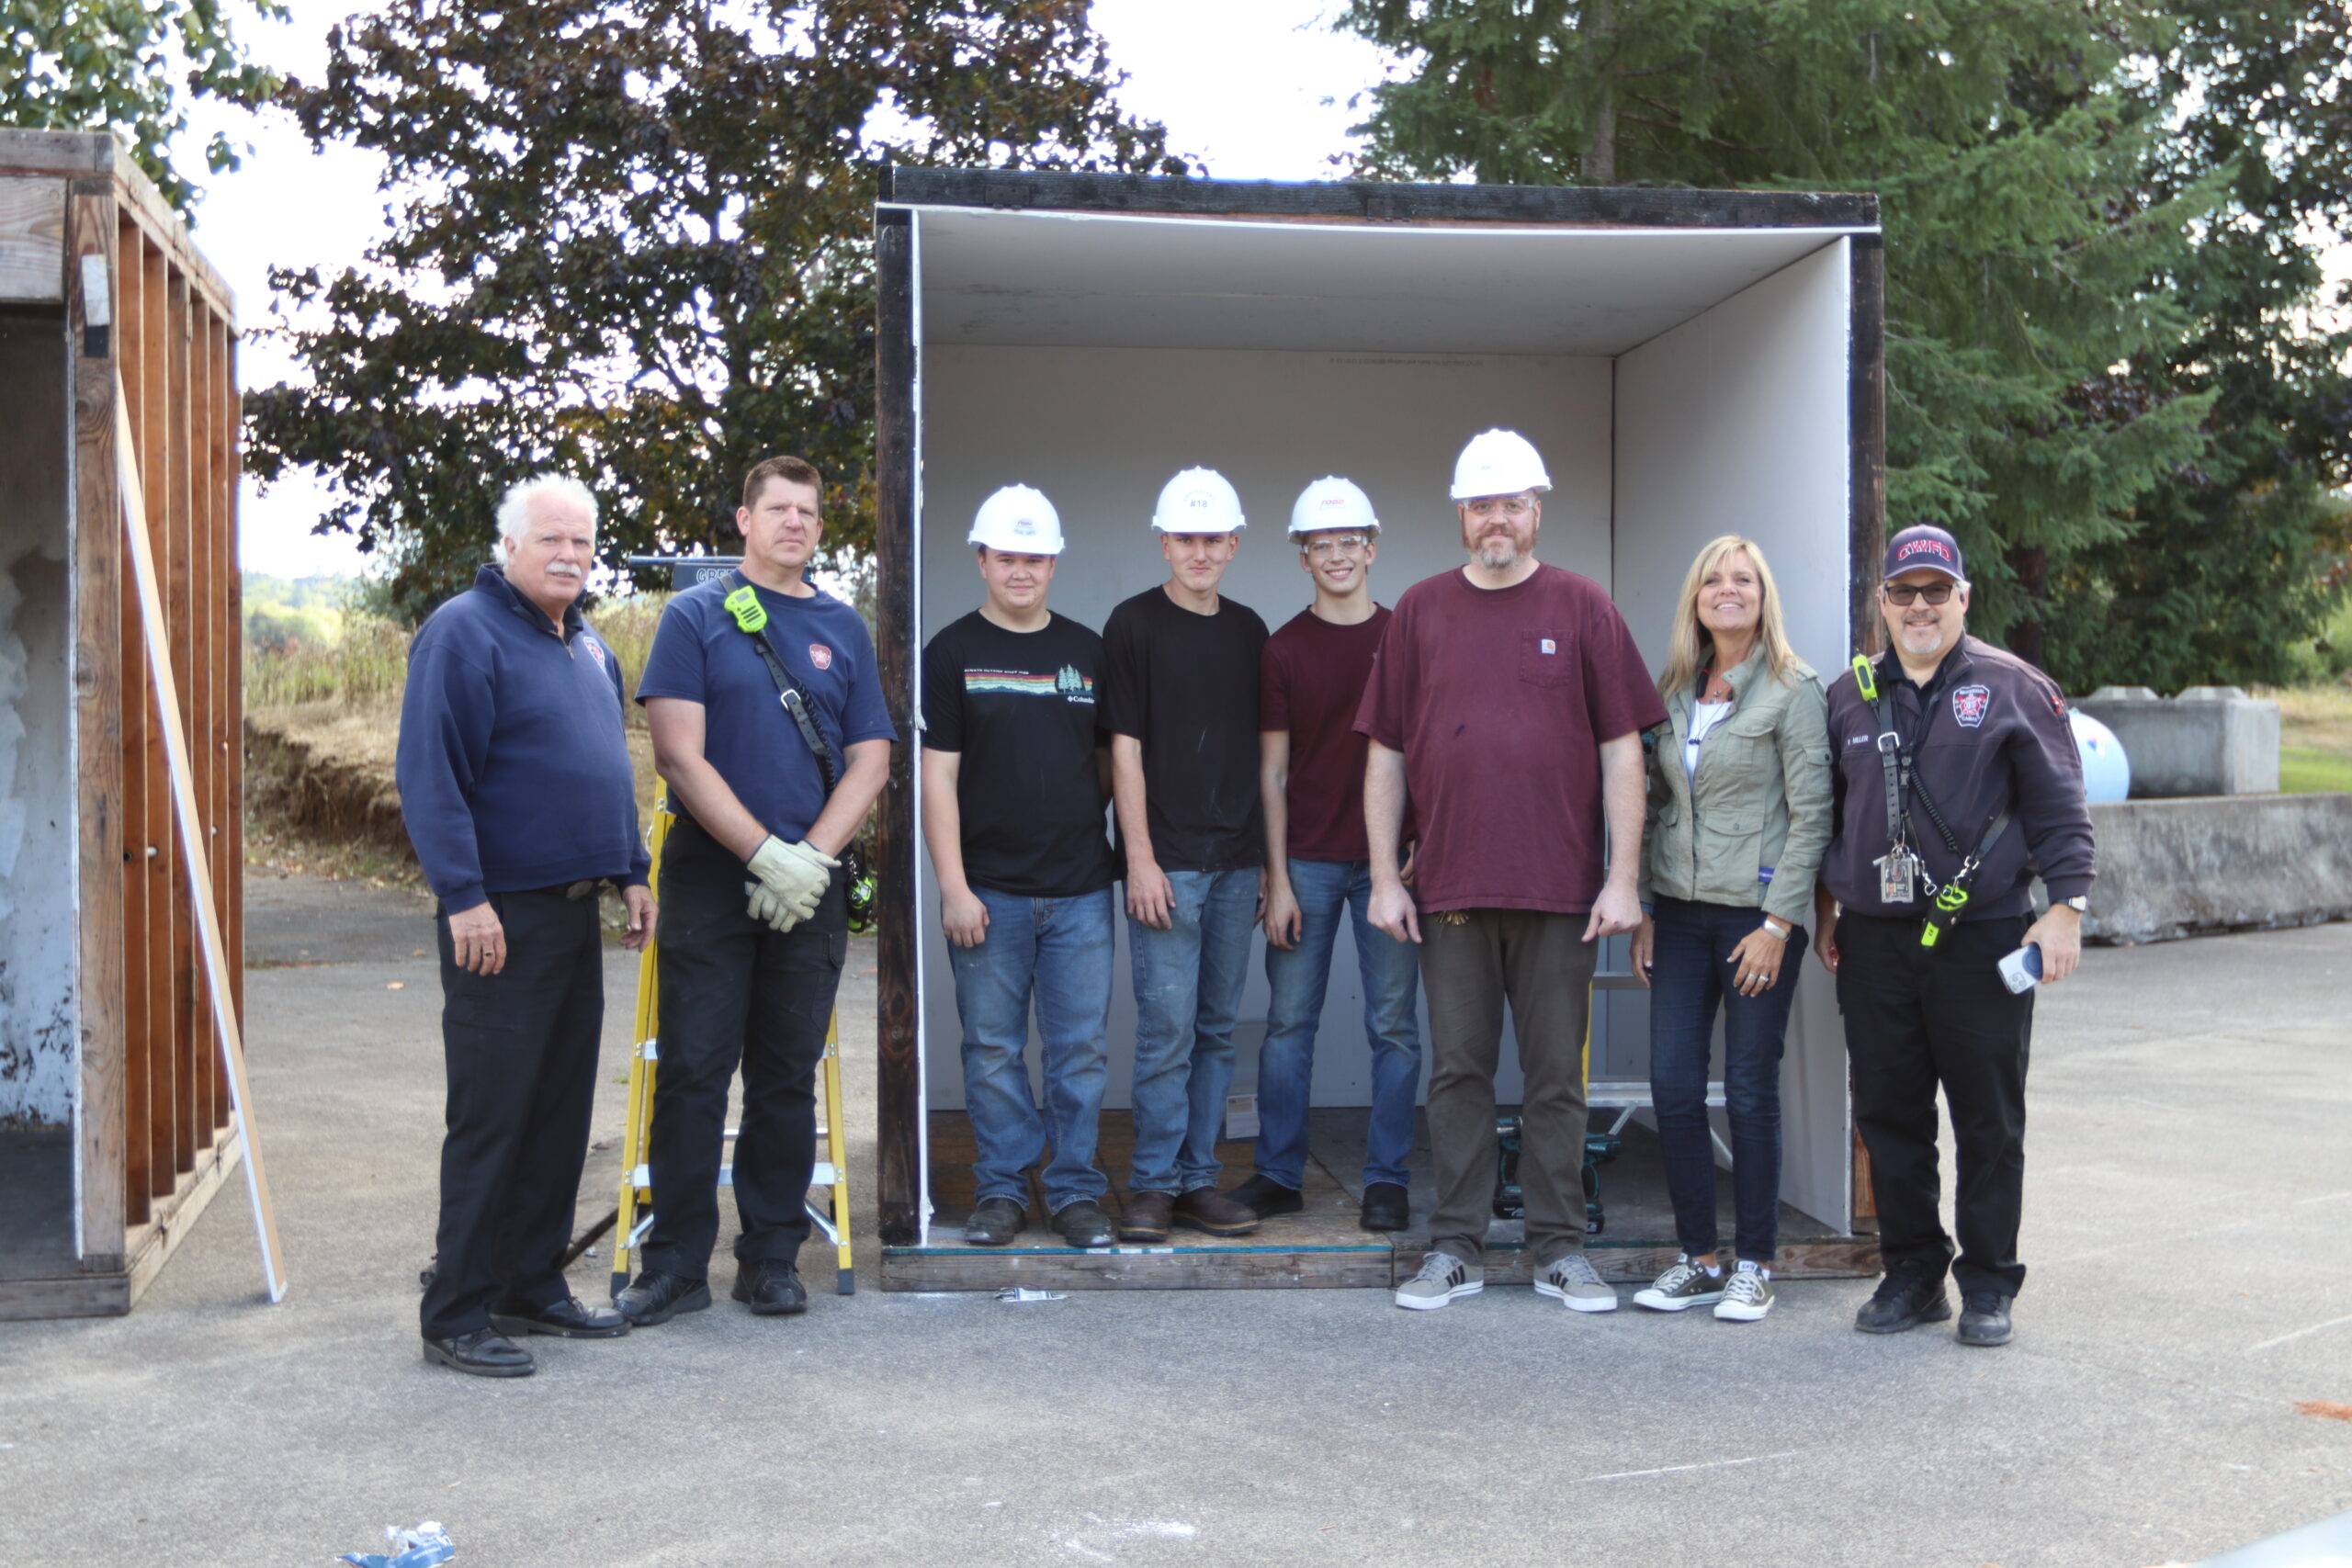 Students and fire fighters pose in front of rooms built to demonstrate fire safety